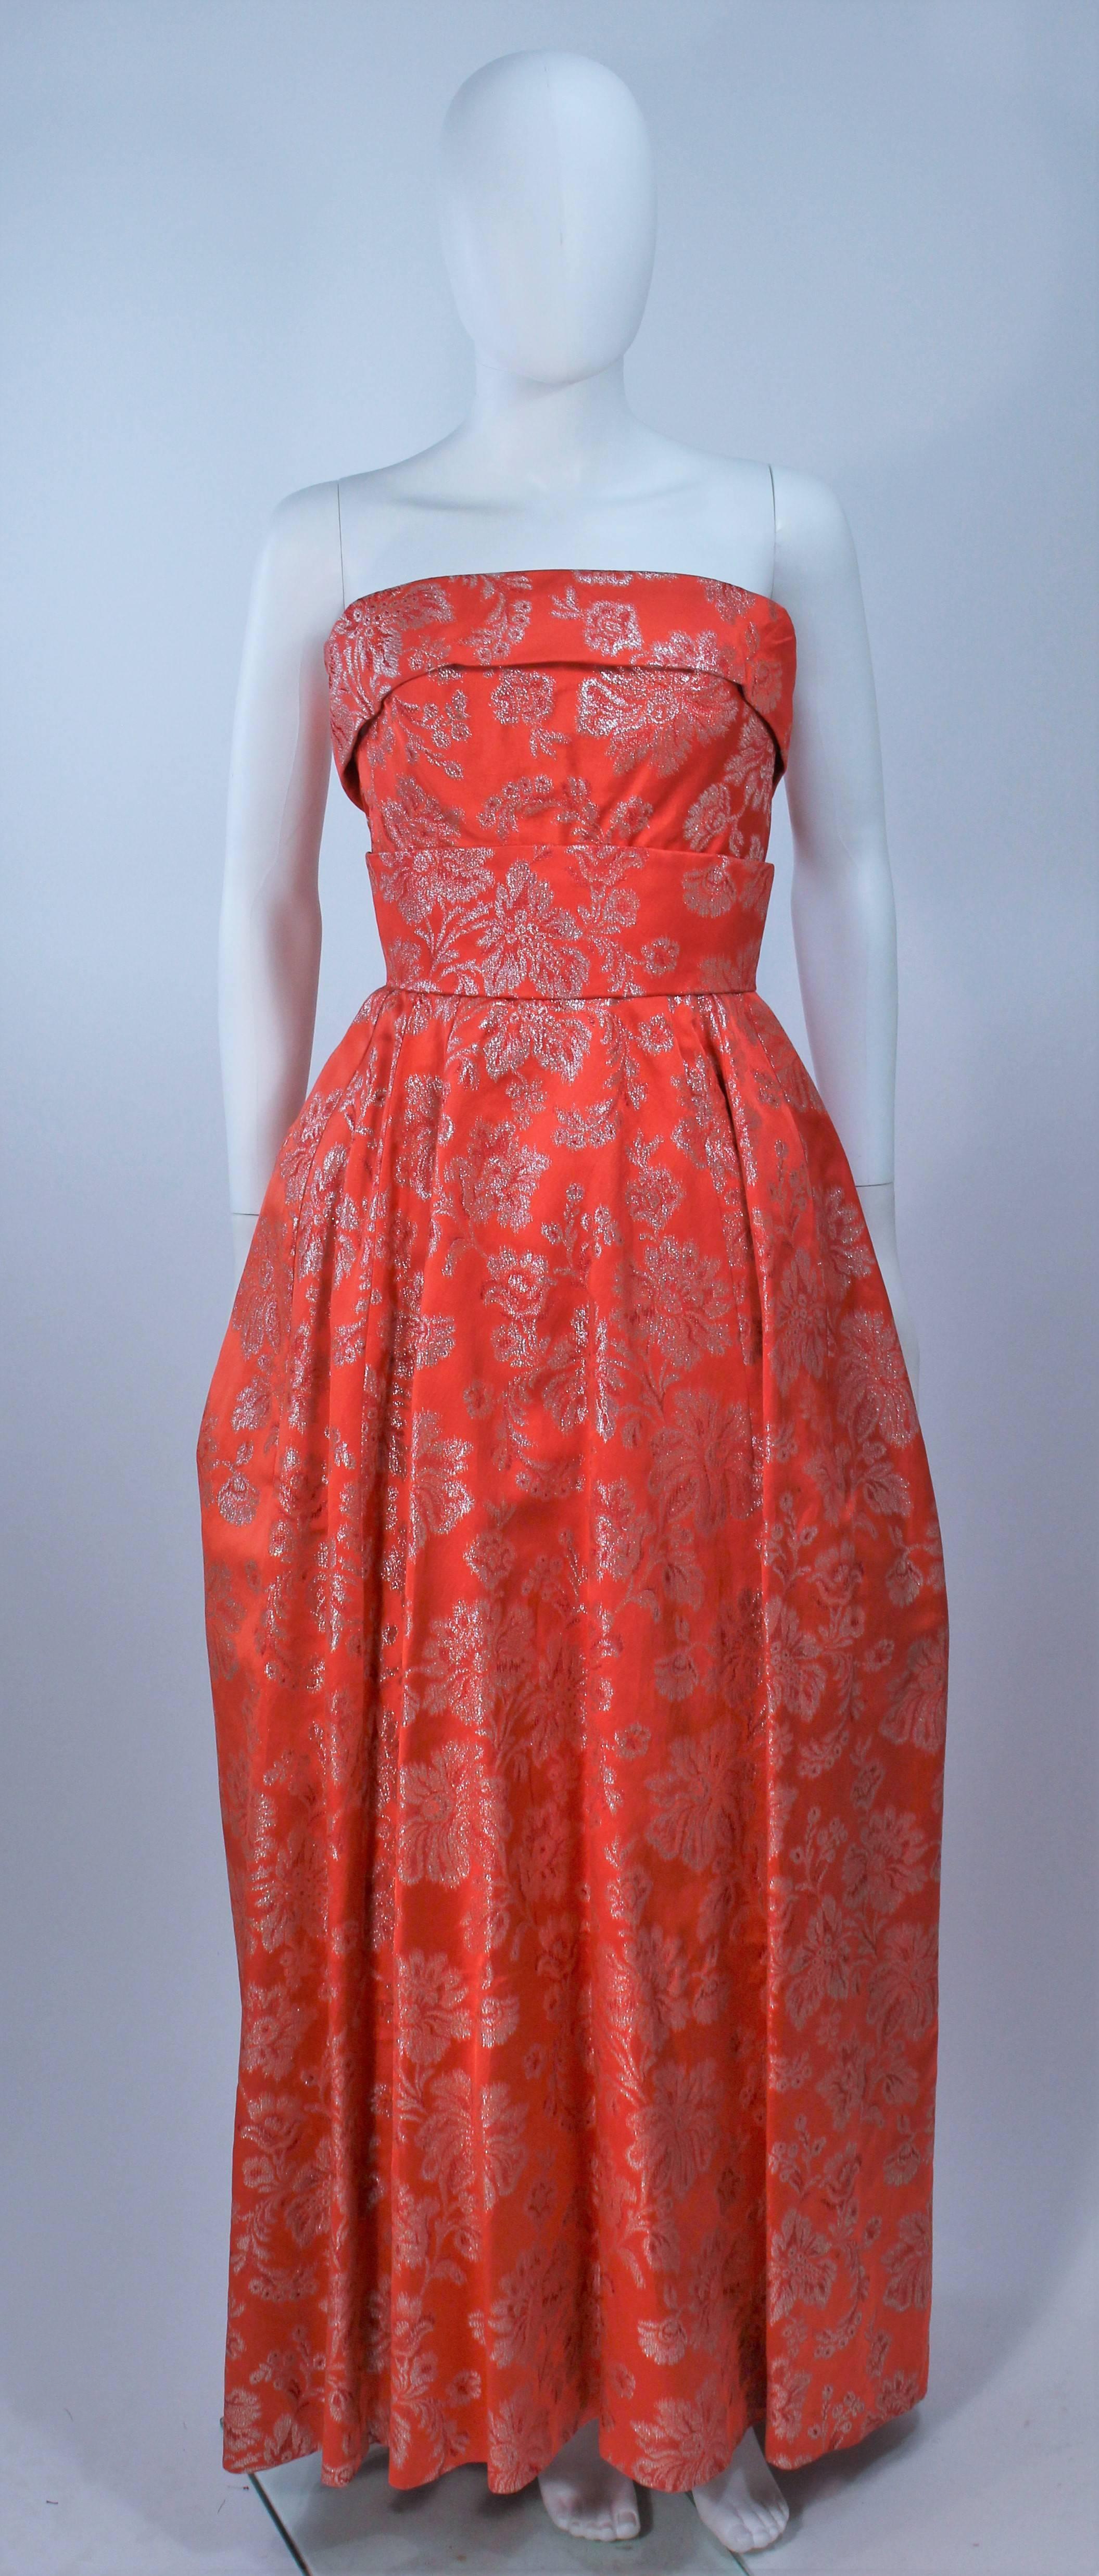  This gown is composed of a coral hue orange silk with floral lame motif. There is a large bow detail at the center back and a zipper closure. There is interior boning and bustier foundation (Shoot with additional crinoline). In excellent vintage